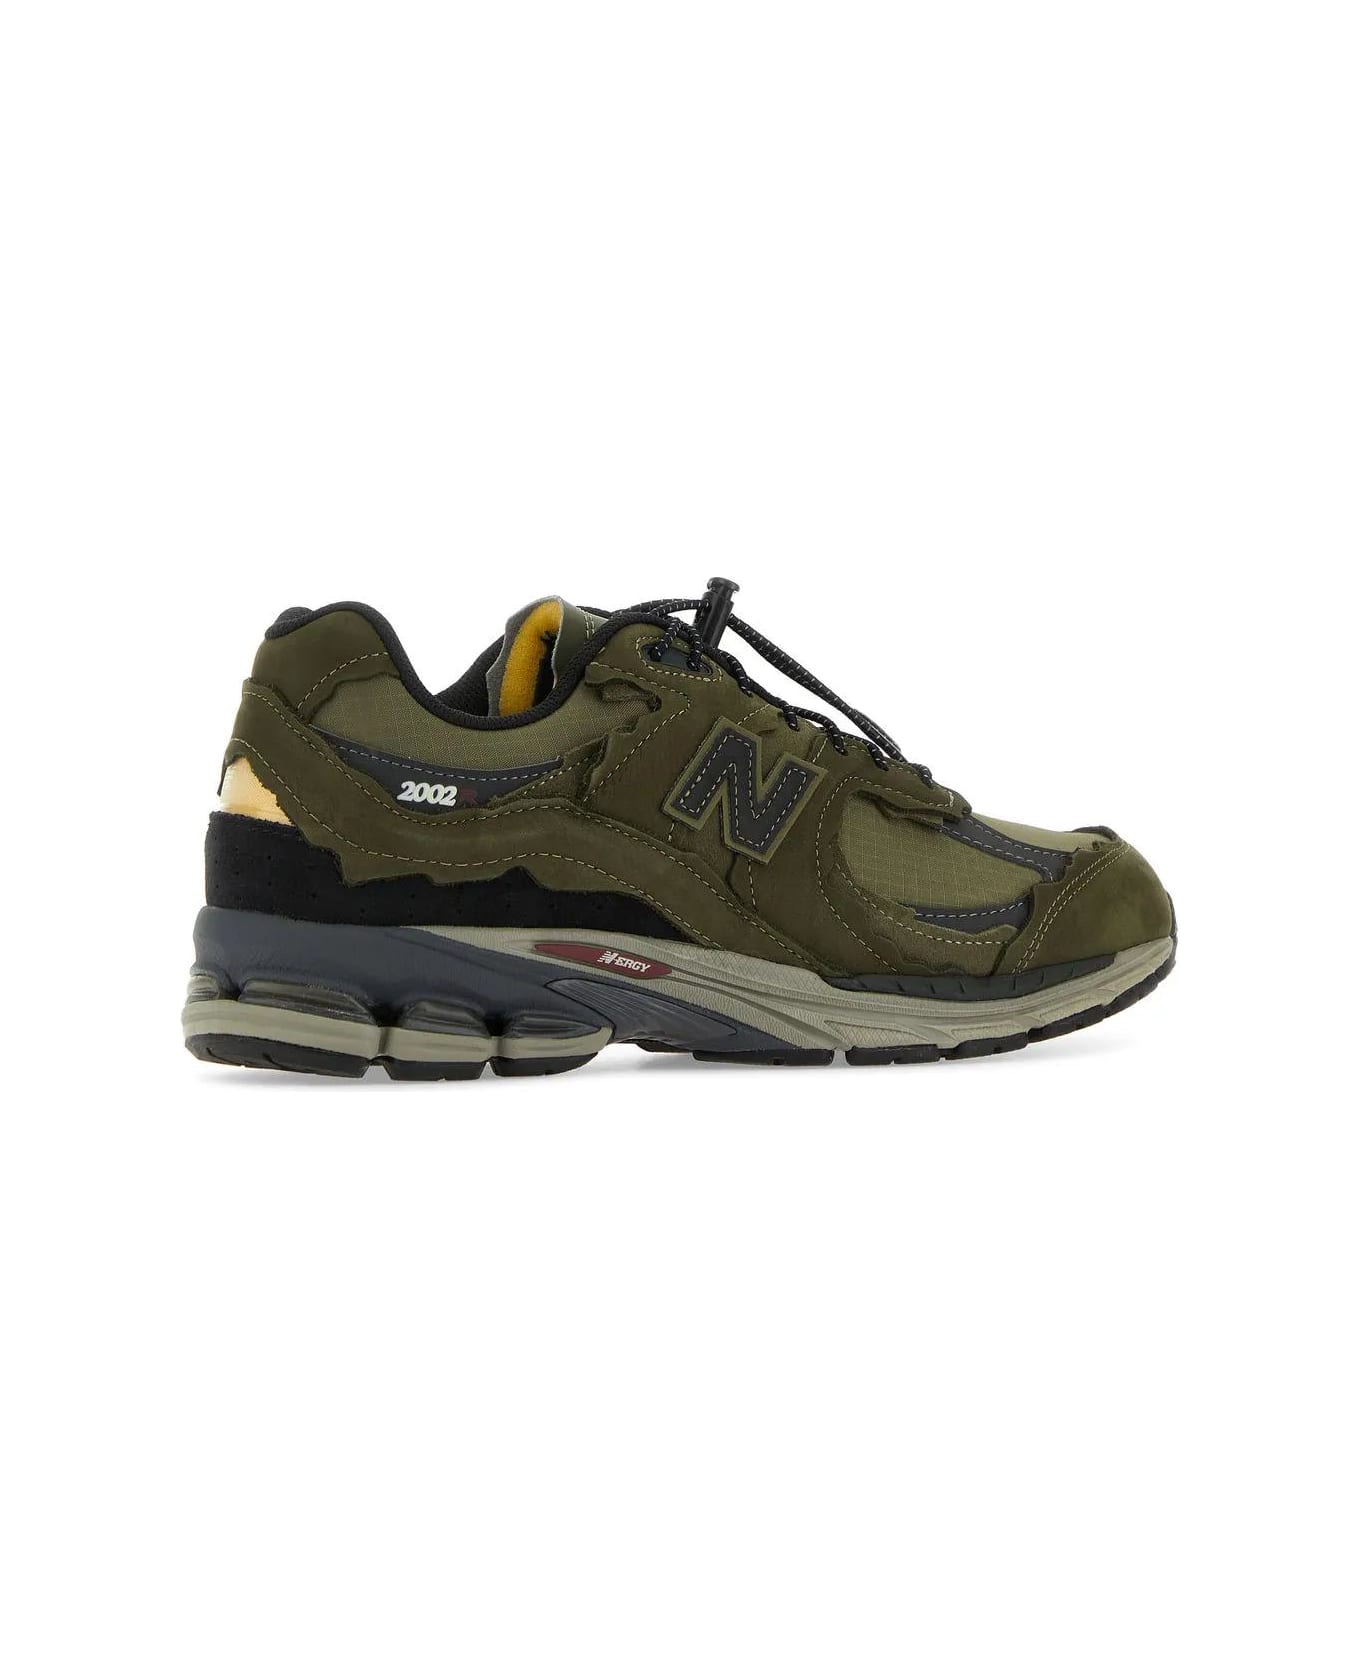 New Balance Multicolor Suede And Fabric 2002r Sneakers - Camouflage スニーカー